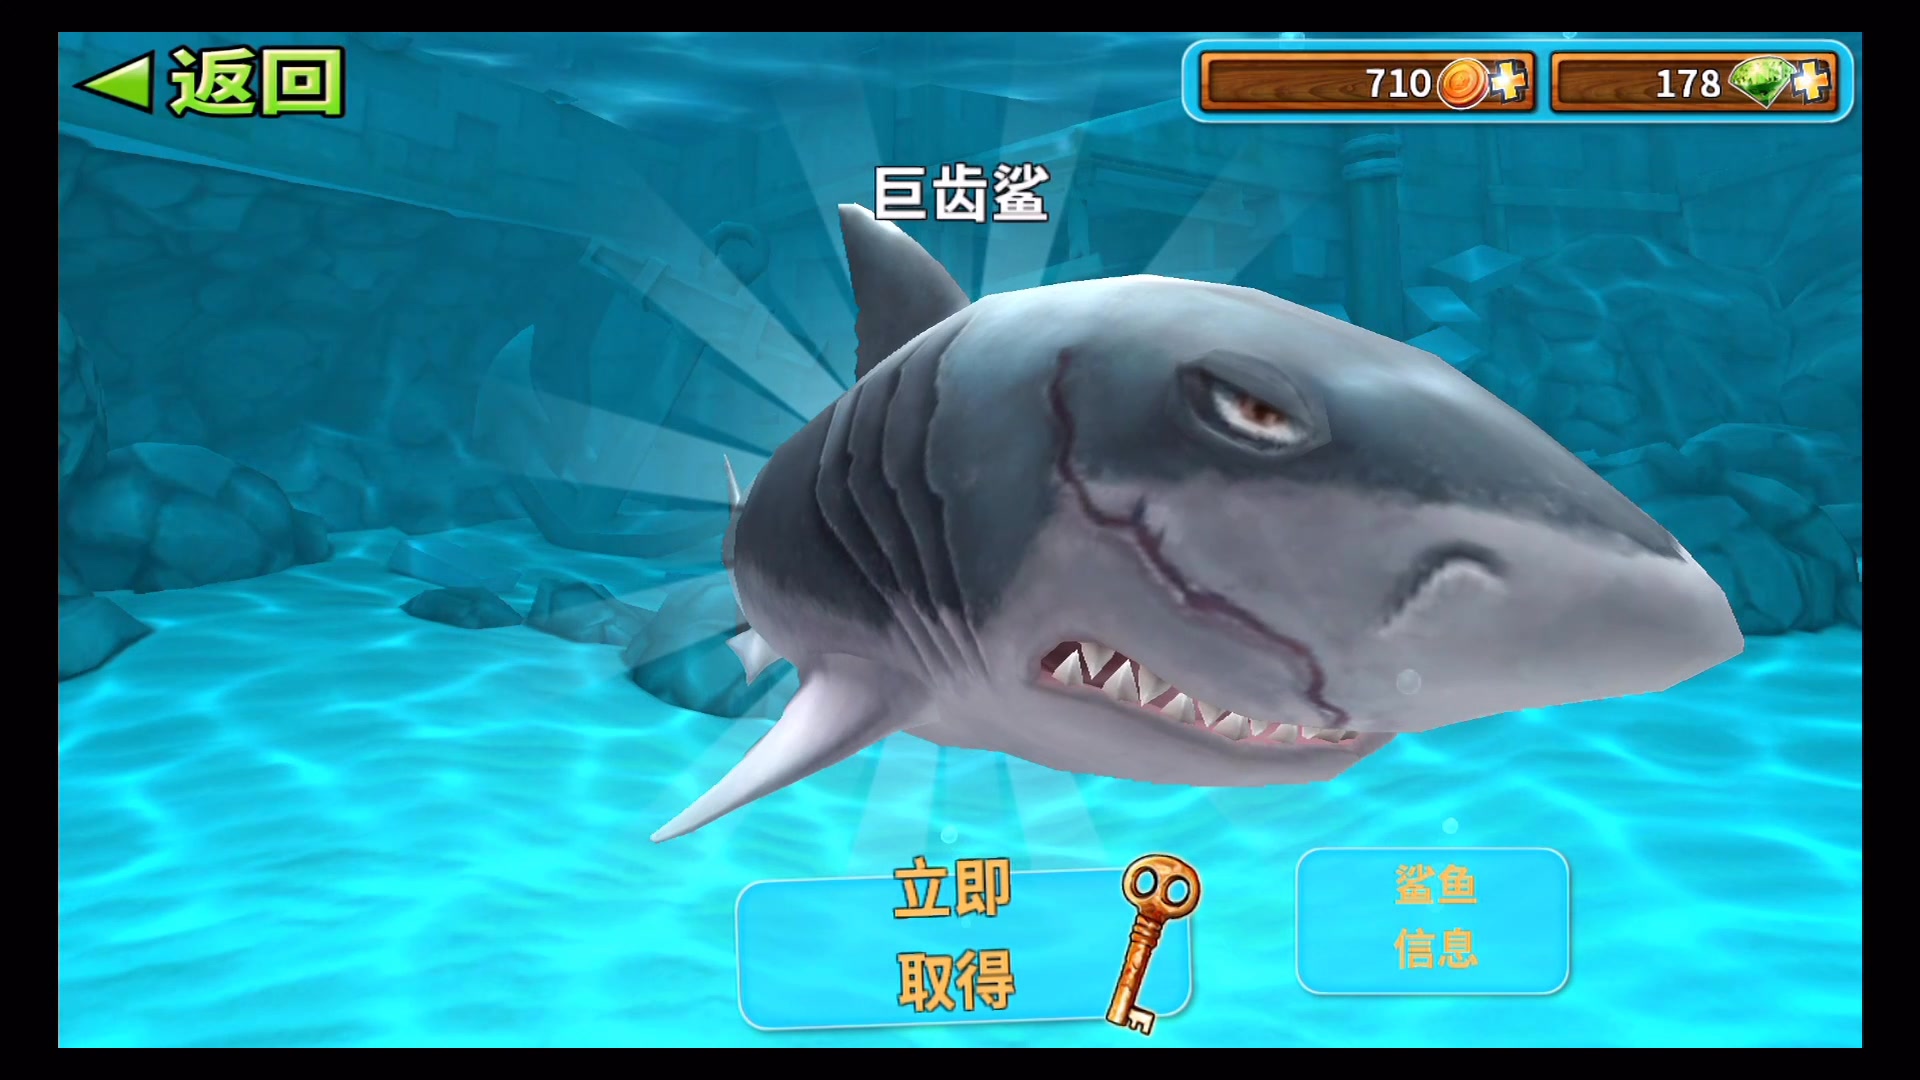 Hungry Shark World: Amazon.co.uk: Appstore for Android